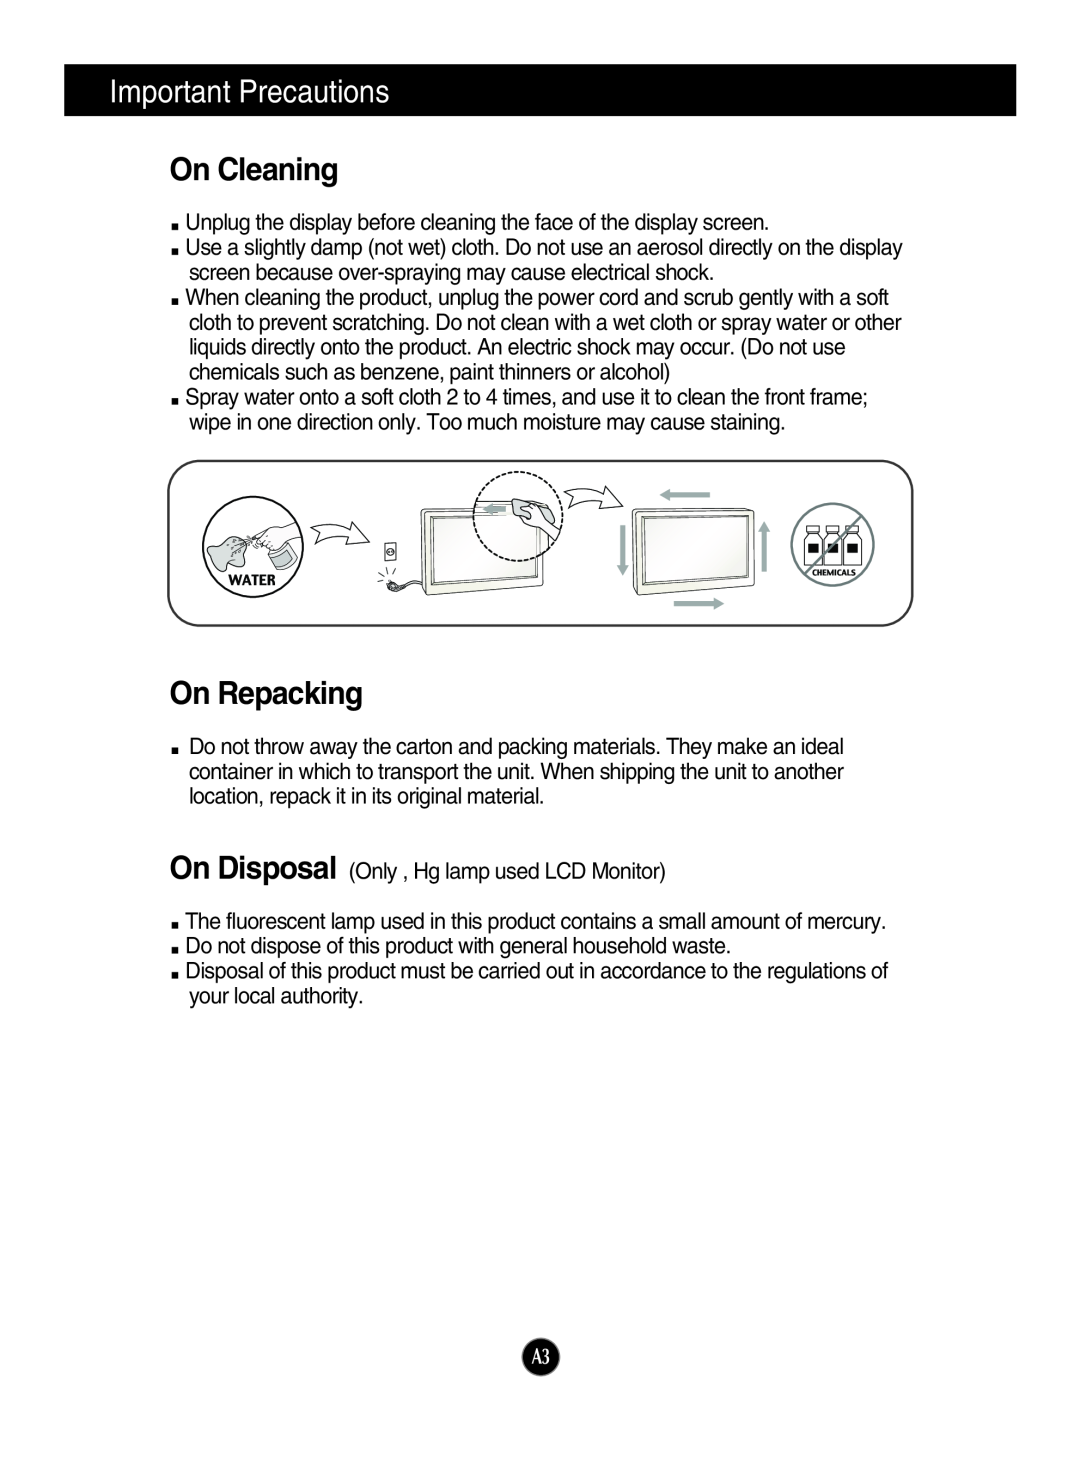 LG Electronics N1642WP, N1941WP, N1941WE manual On Cleaning, On Repacking, Important Precautions 